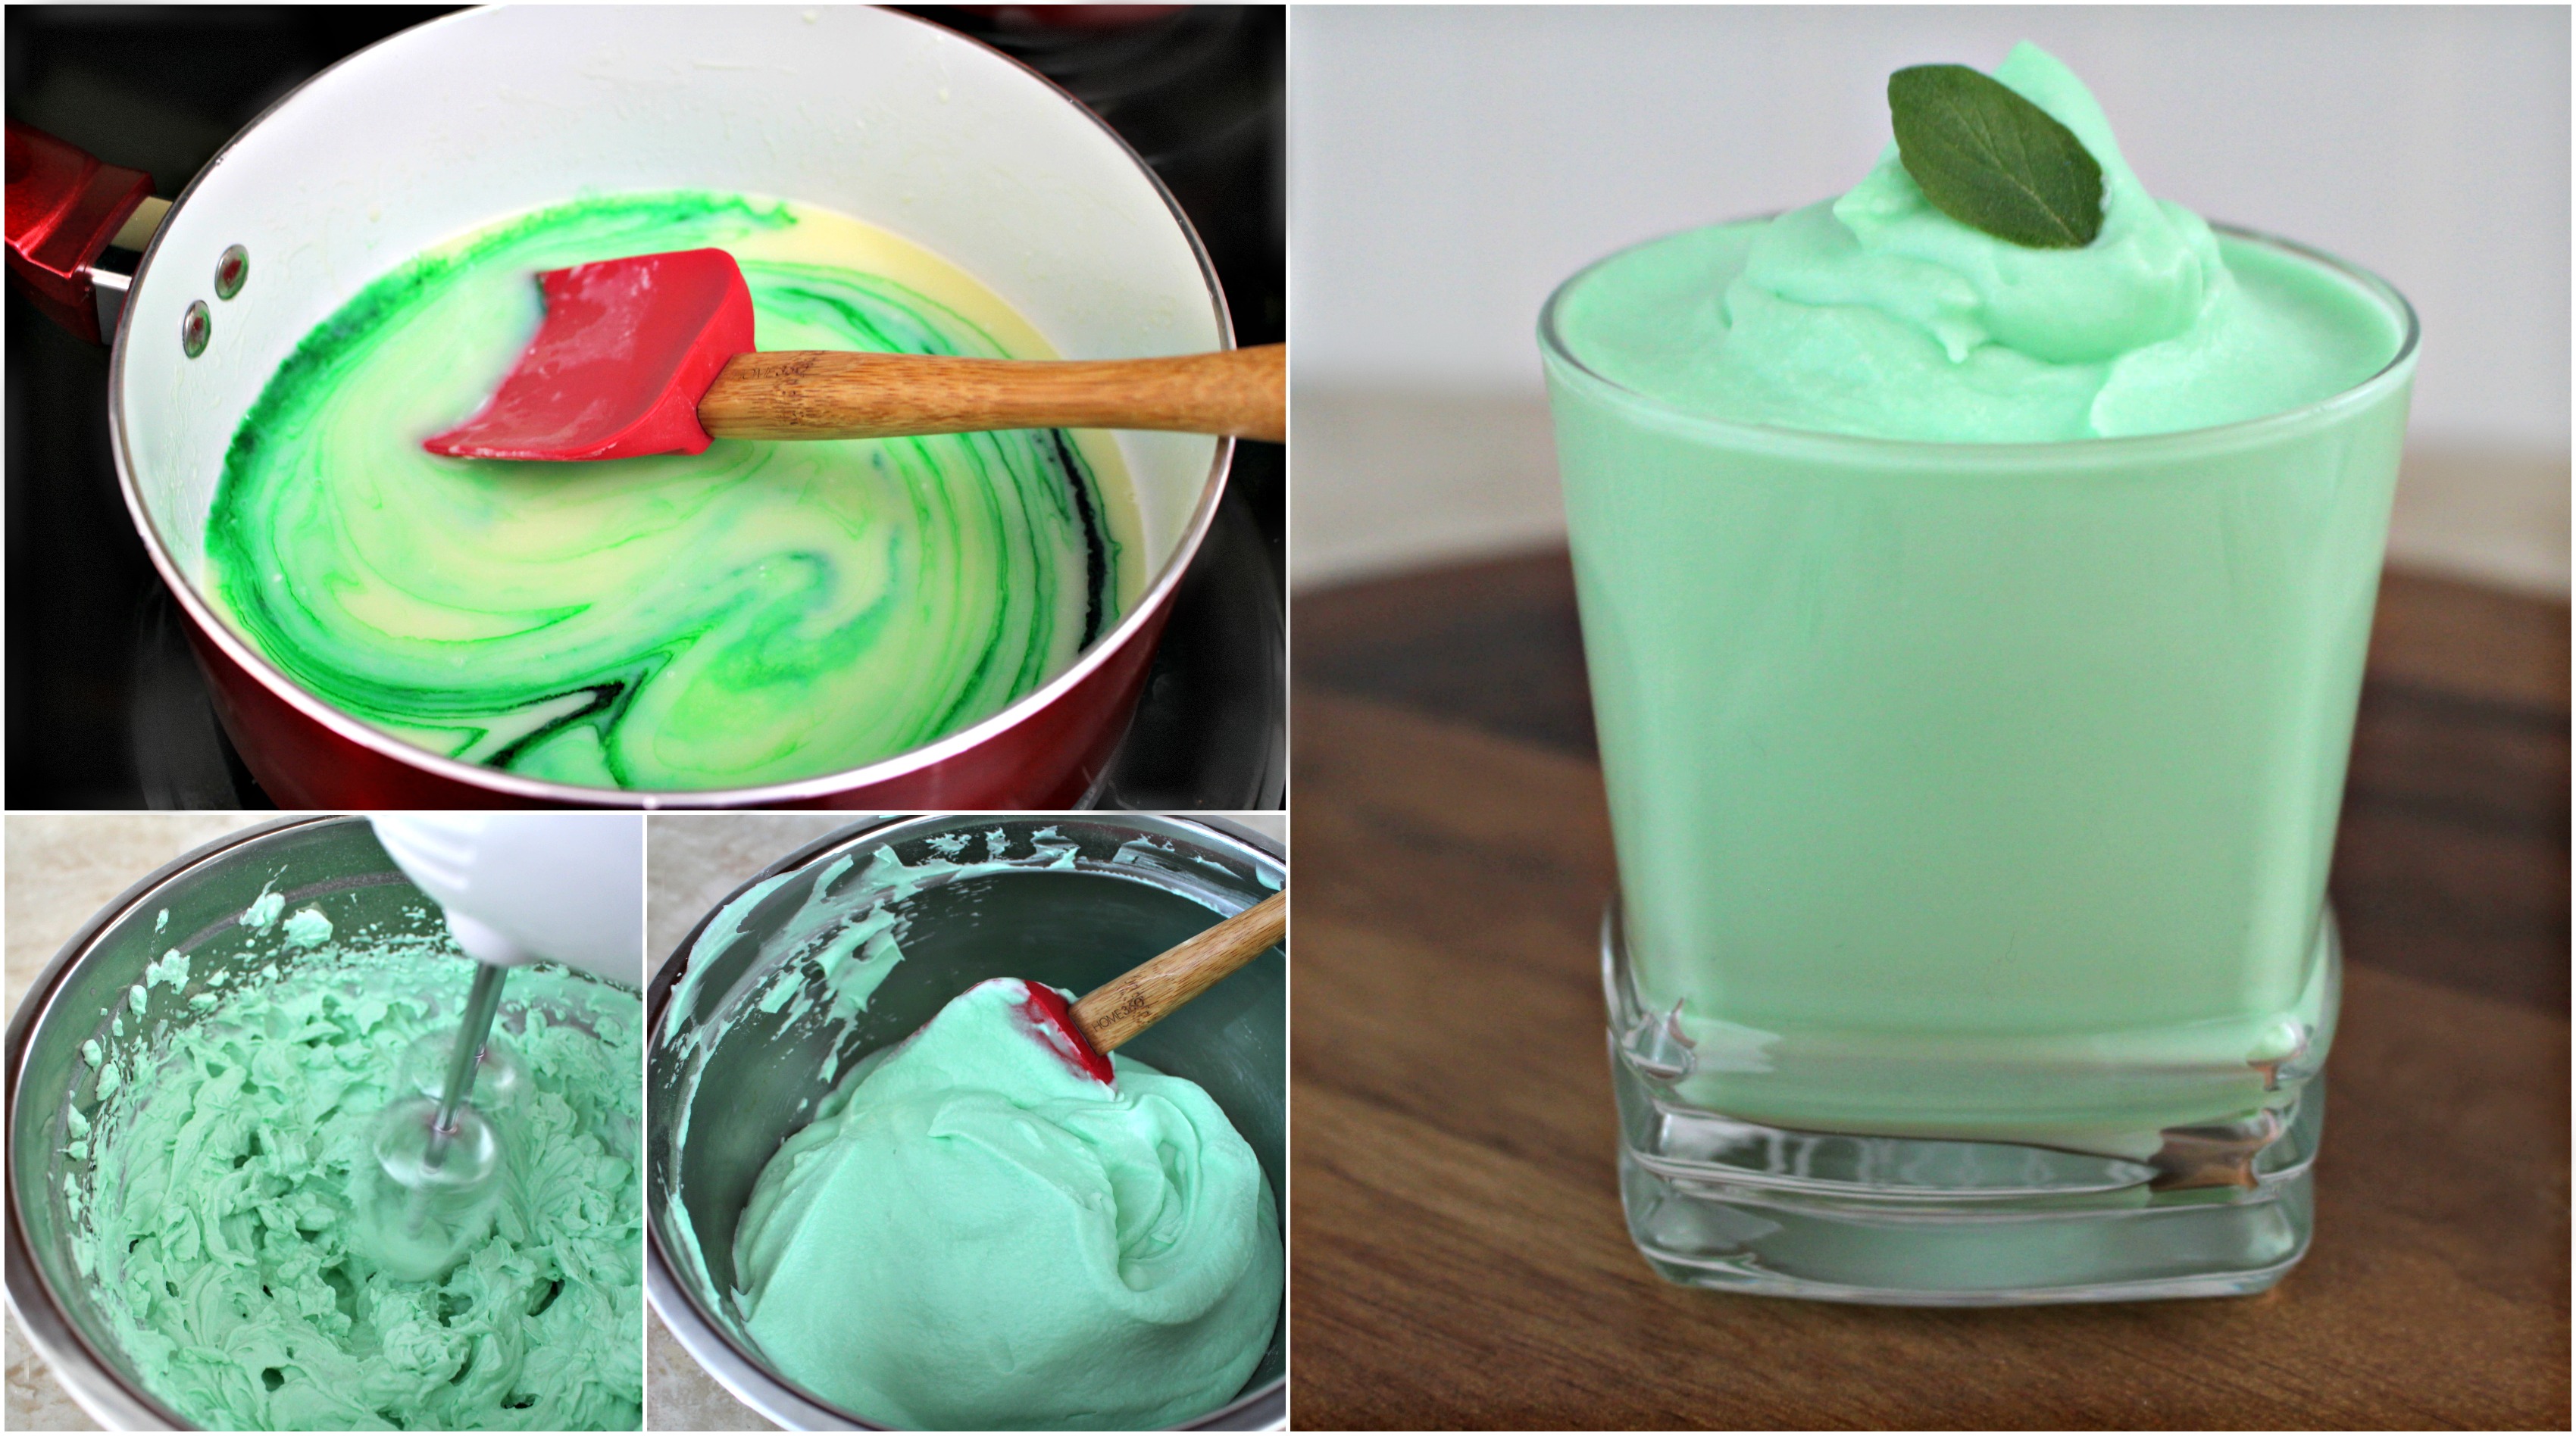 Peppermint St. Patrick's Day Mousse